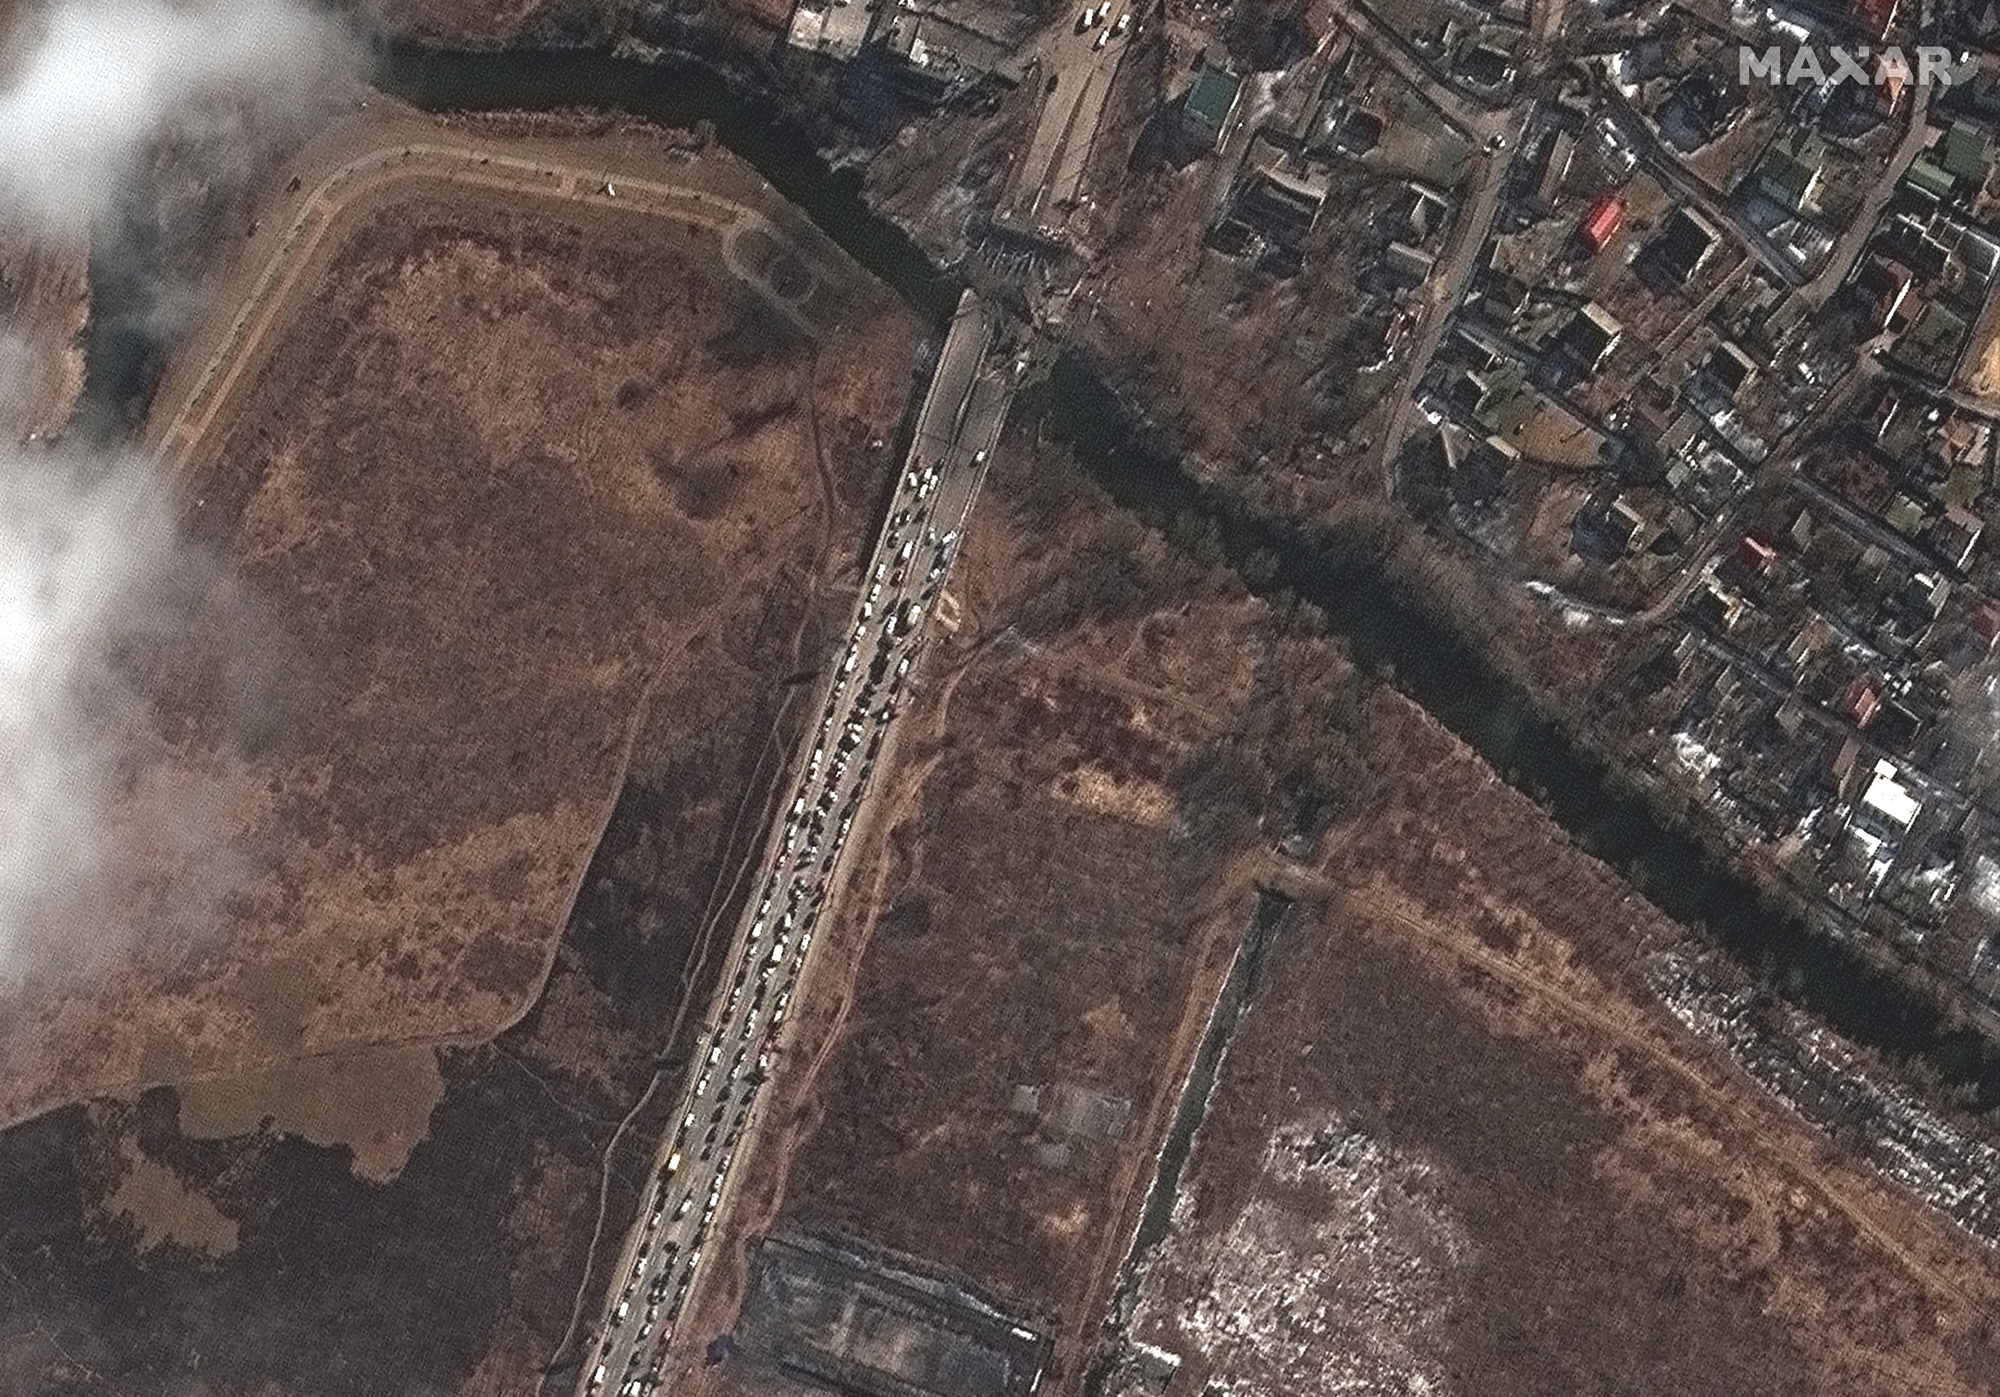 A long line of cars and people leaving Irpin and damaged bridge is visible in this Maxar satellite image taken on March 10, 2022.